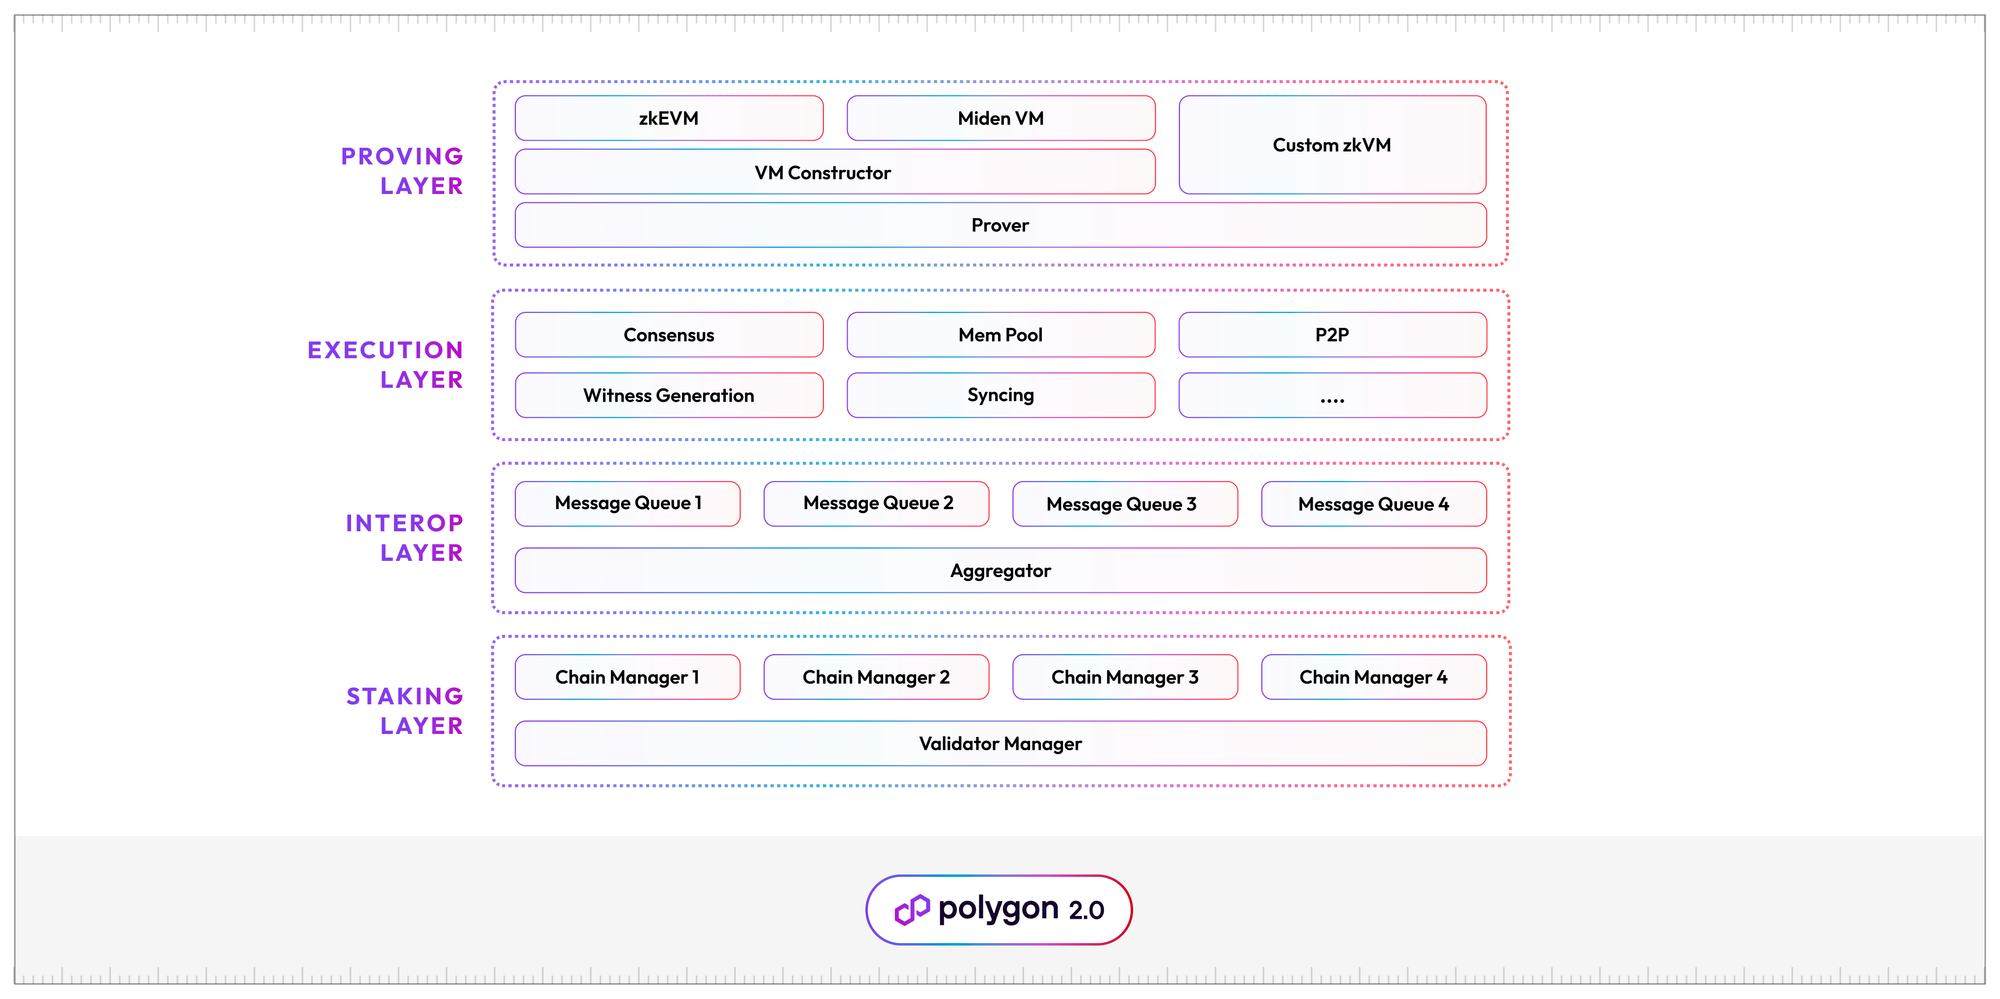 https://polygon.technology/blog/polygon-2-0-protocol-vision-and-architecture?utm_source=twitter&utm_medium=social&utm_content=polygon-2.0-protocol-vision-and-architecture